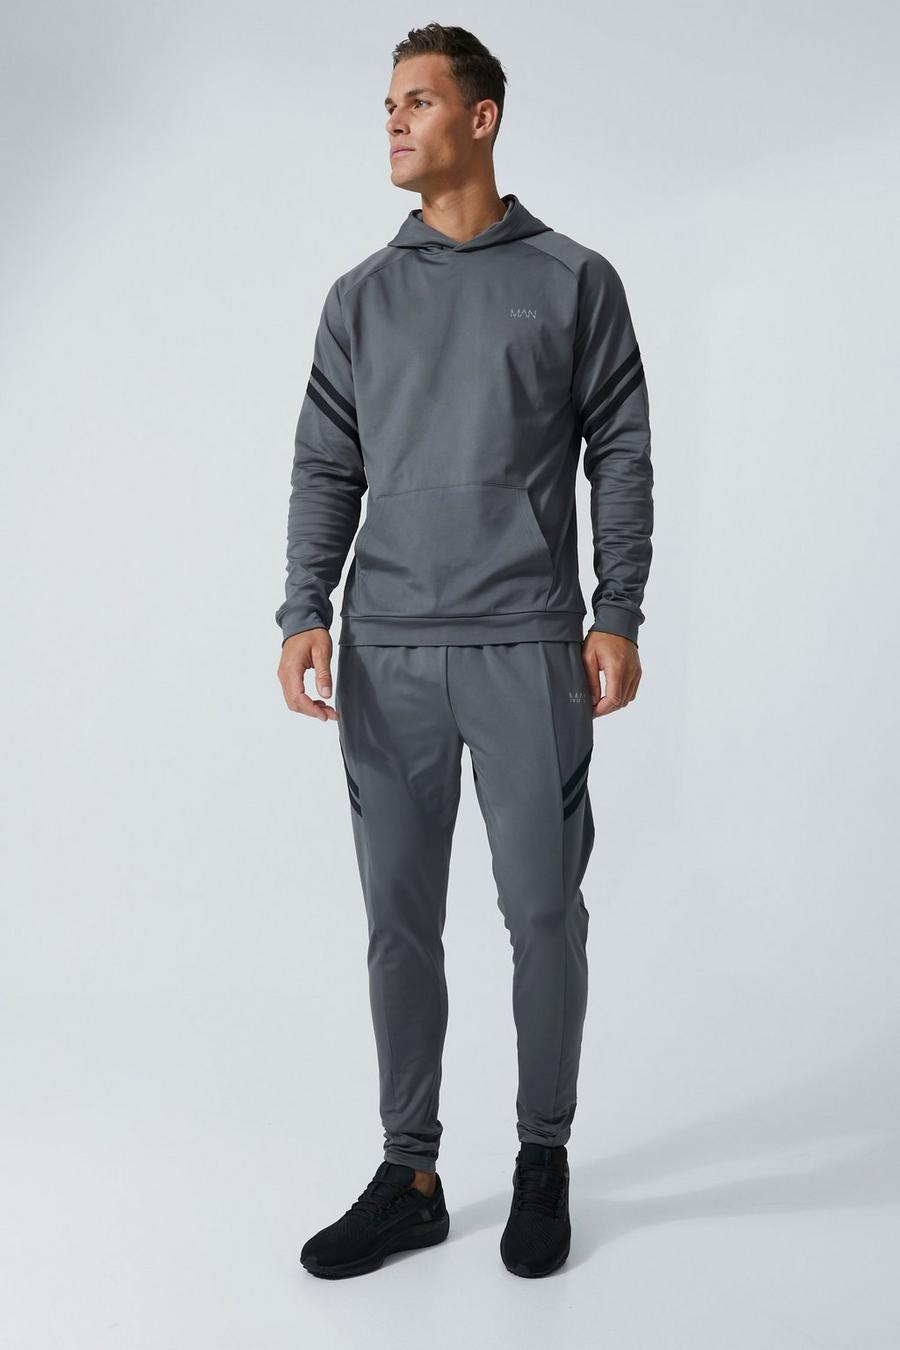 Charcoal gris Tall Man Active Training ¼ Zip Hoodie Tracksuit